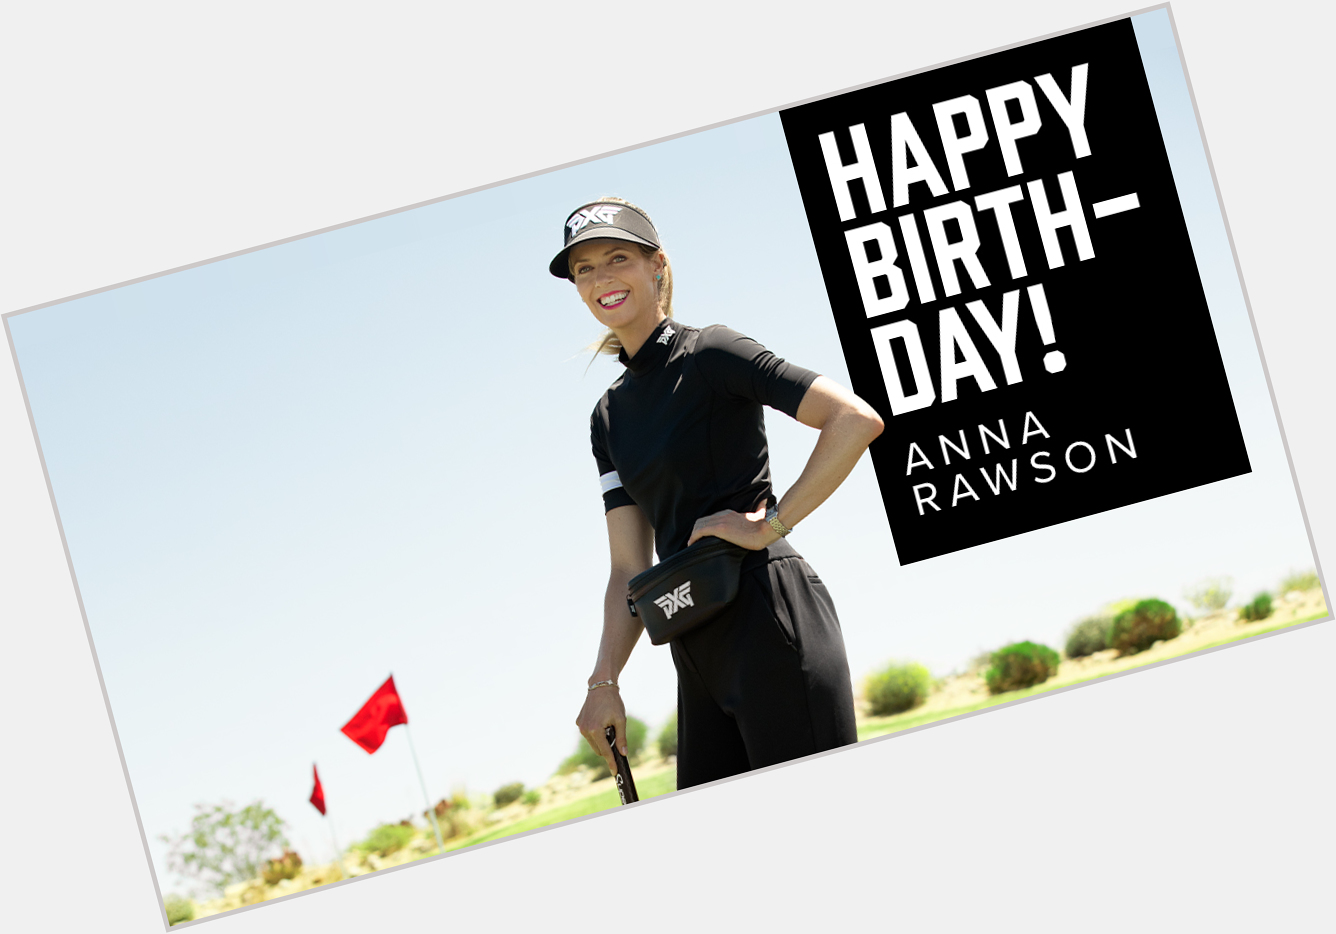 Happy birthday to the queen of swing tips Anna Rawson        \s you! 